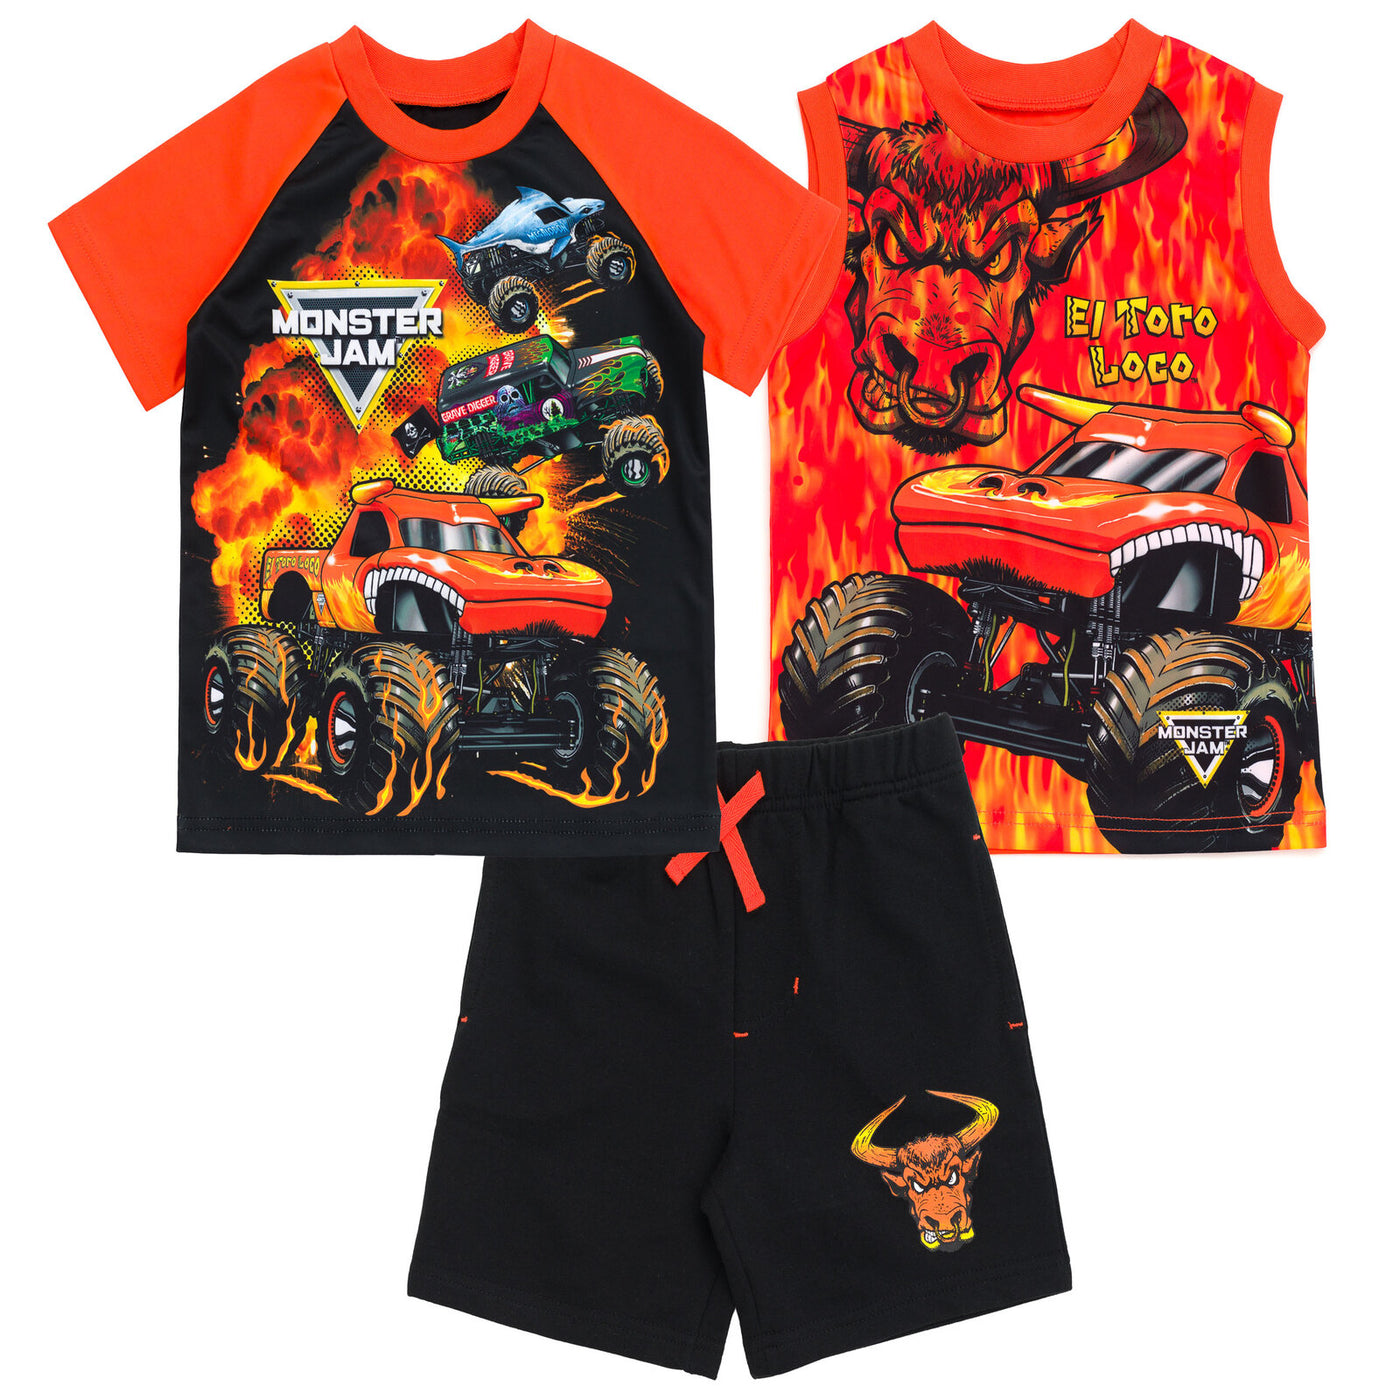 Monster Jam Mix N' Match Athletic T-Shirt Tank Top French Terry Shorts 3 Piece Outfit Set